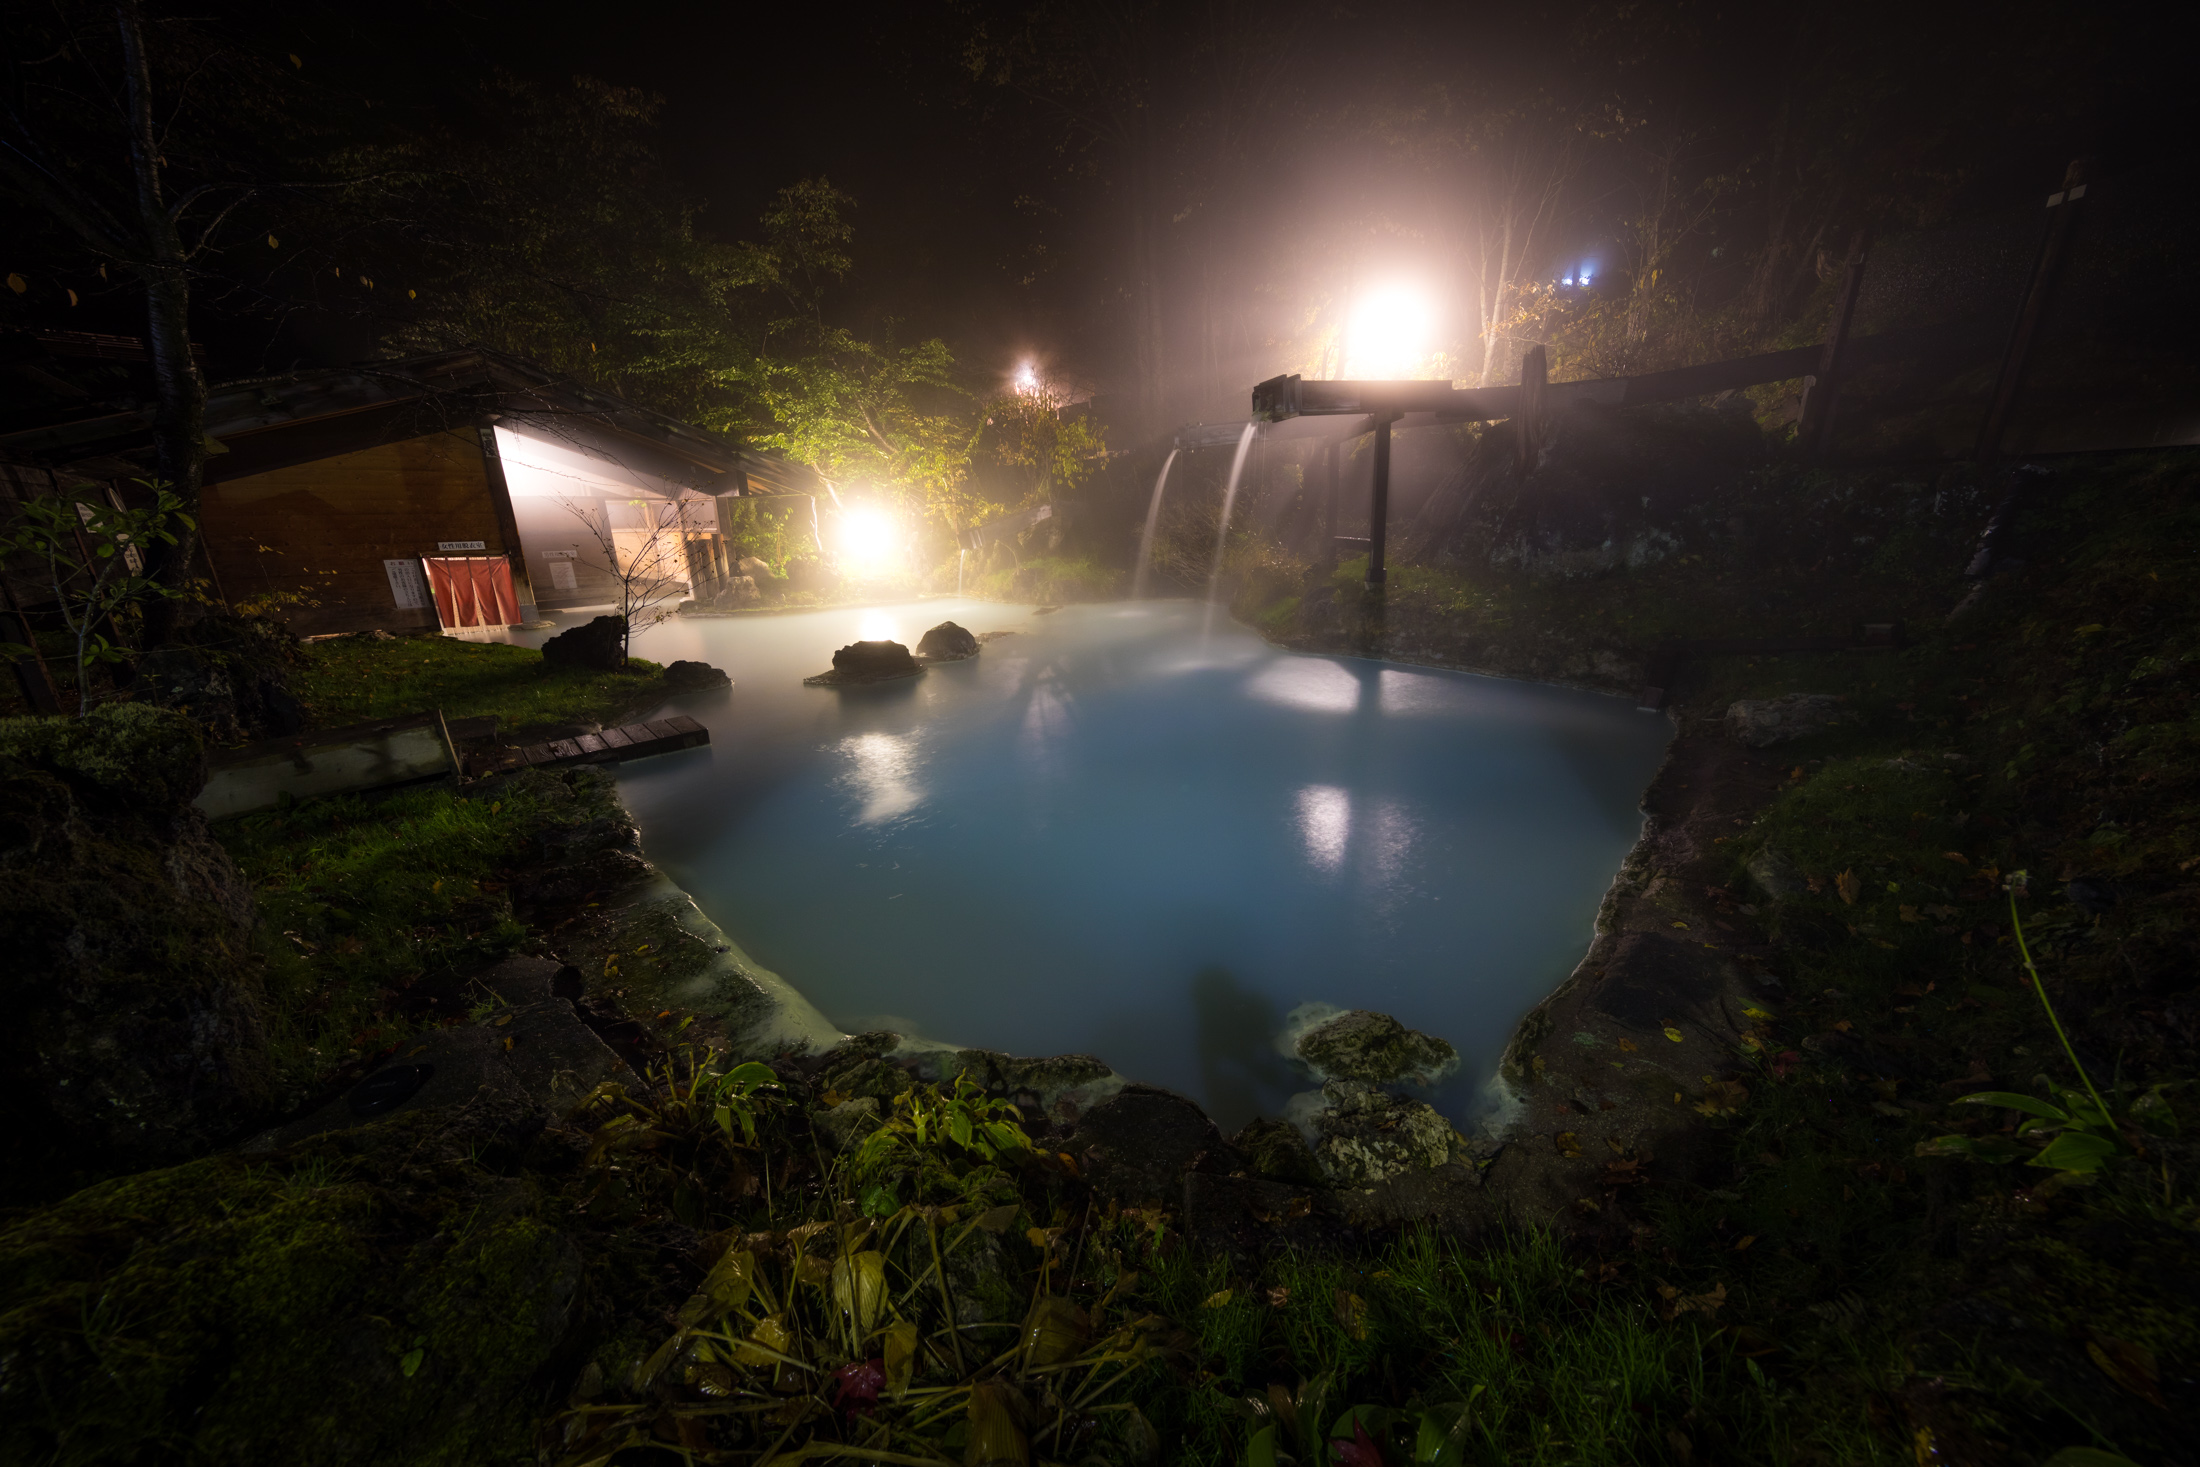 Tranquil hot spring oasis with bubbling turquoise waters in a forest setting.